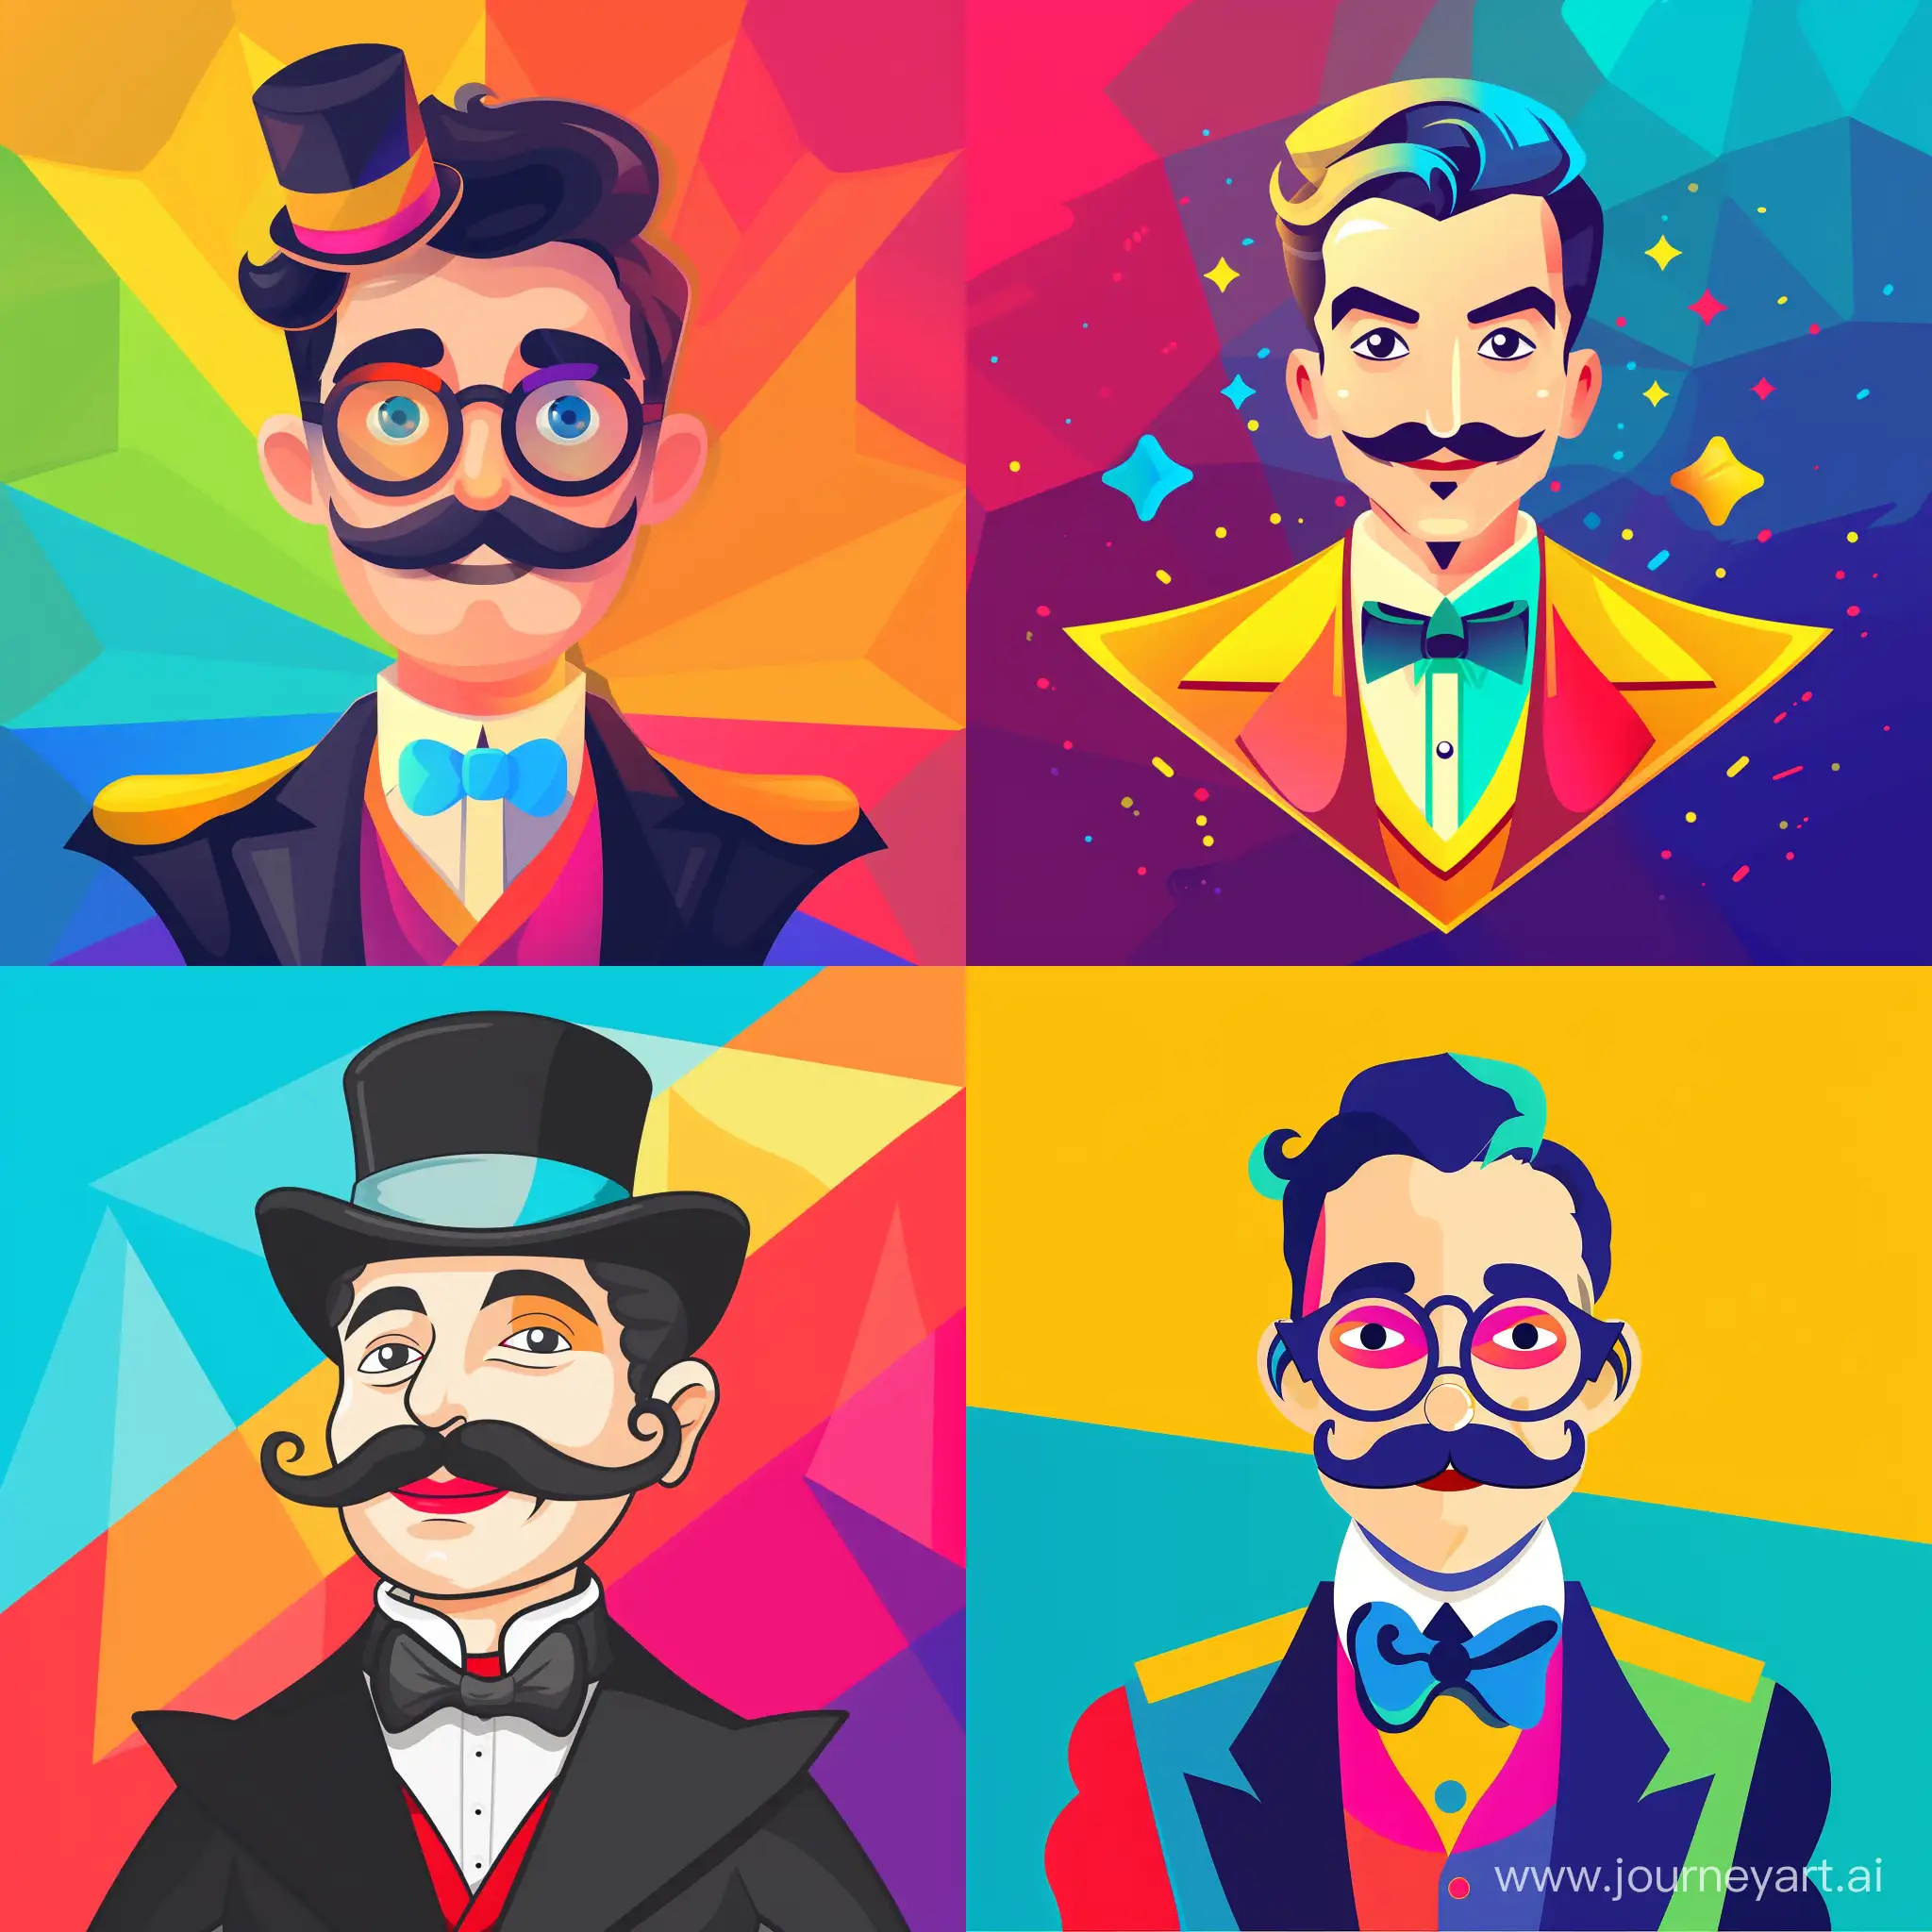 A colorful avatar for the telegram channel, where the main character is a man from monopoly